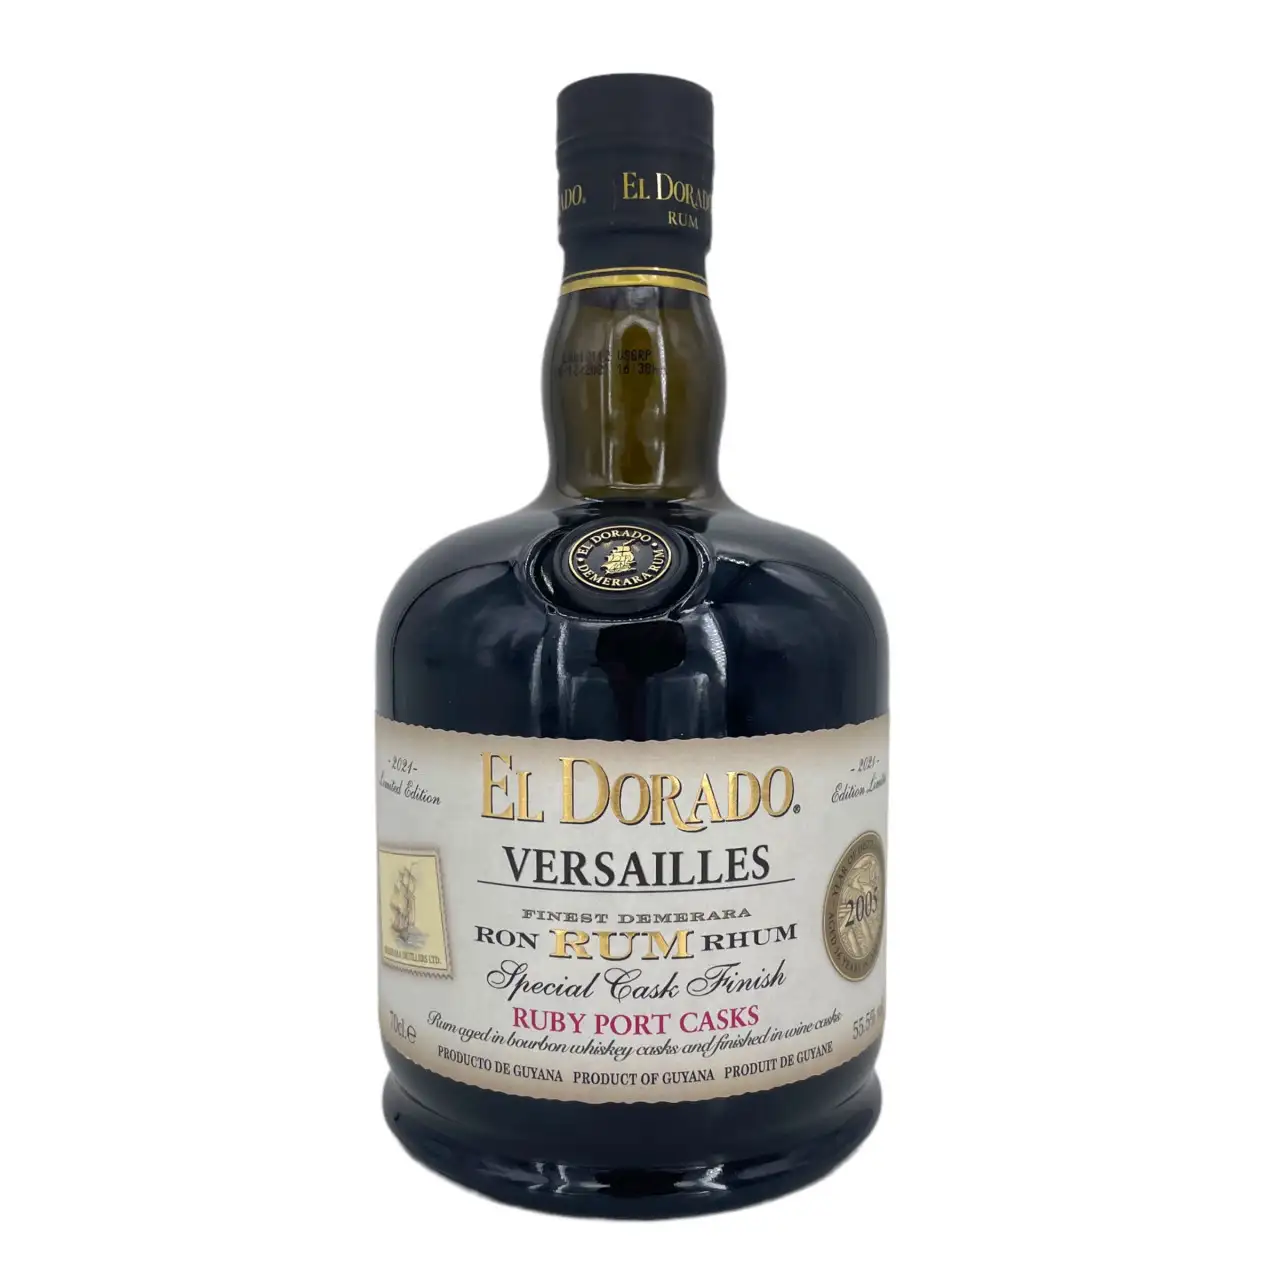 Image of the front of the bottle of the rum El Dorado Special Cask Finish Ruby Port Casks